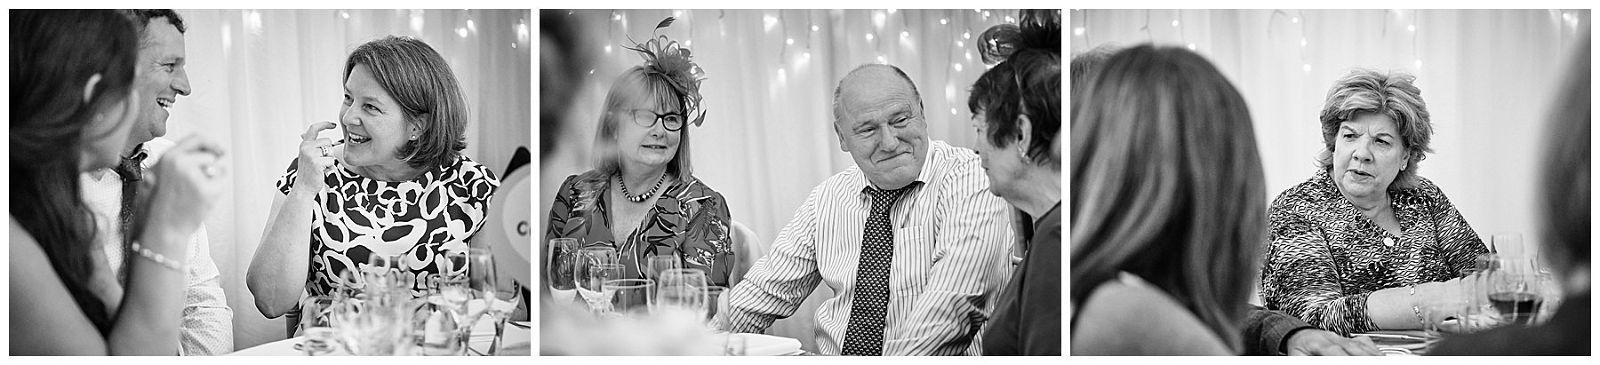 Capturing natural photographs as the guests relax and enjoy the wedding breakfast at Goldstone Hall in Shropshire by Documentary Wedding Photographer Stuart James